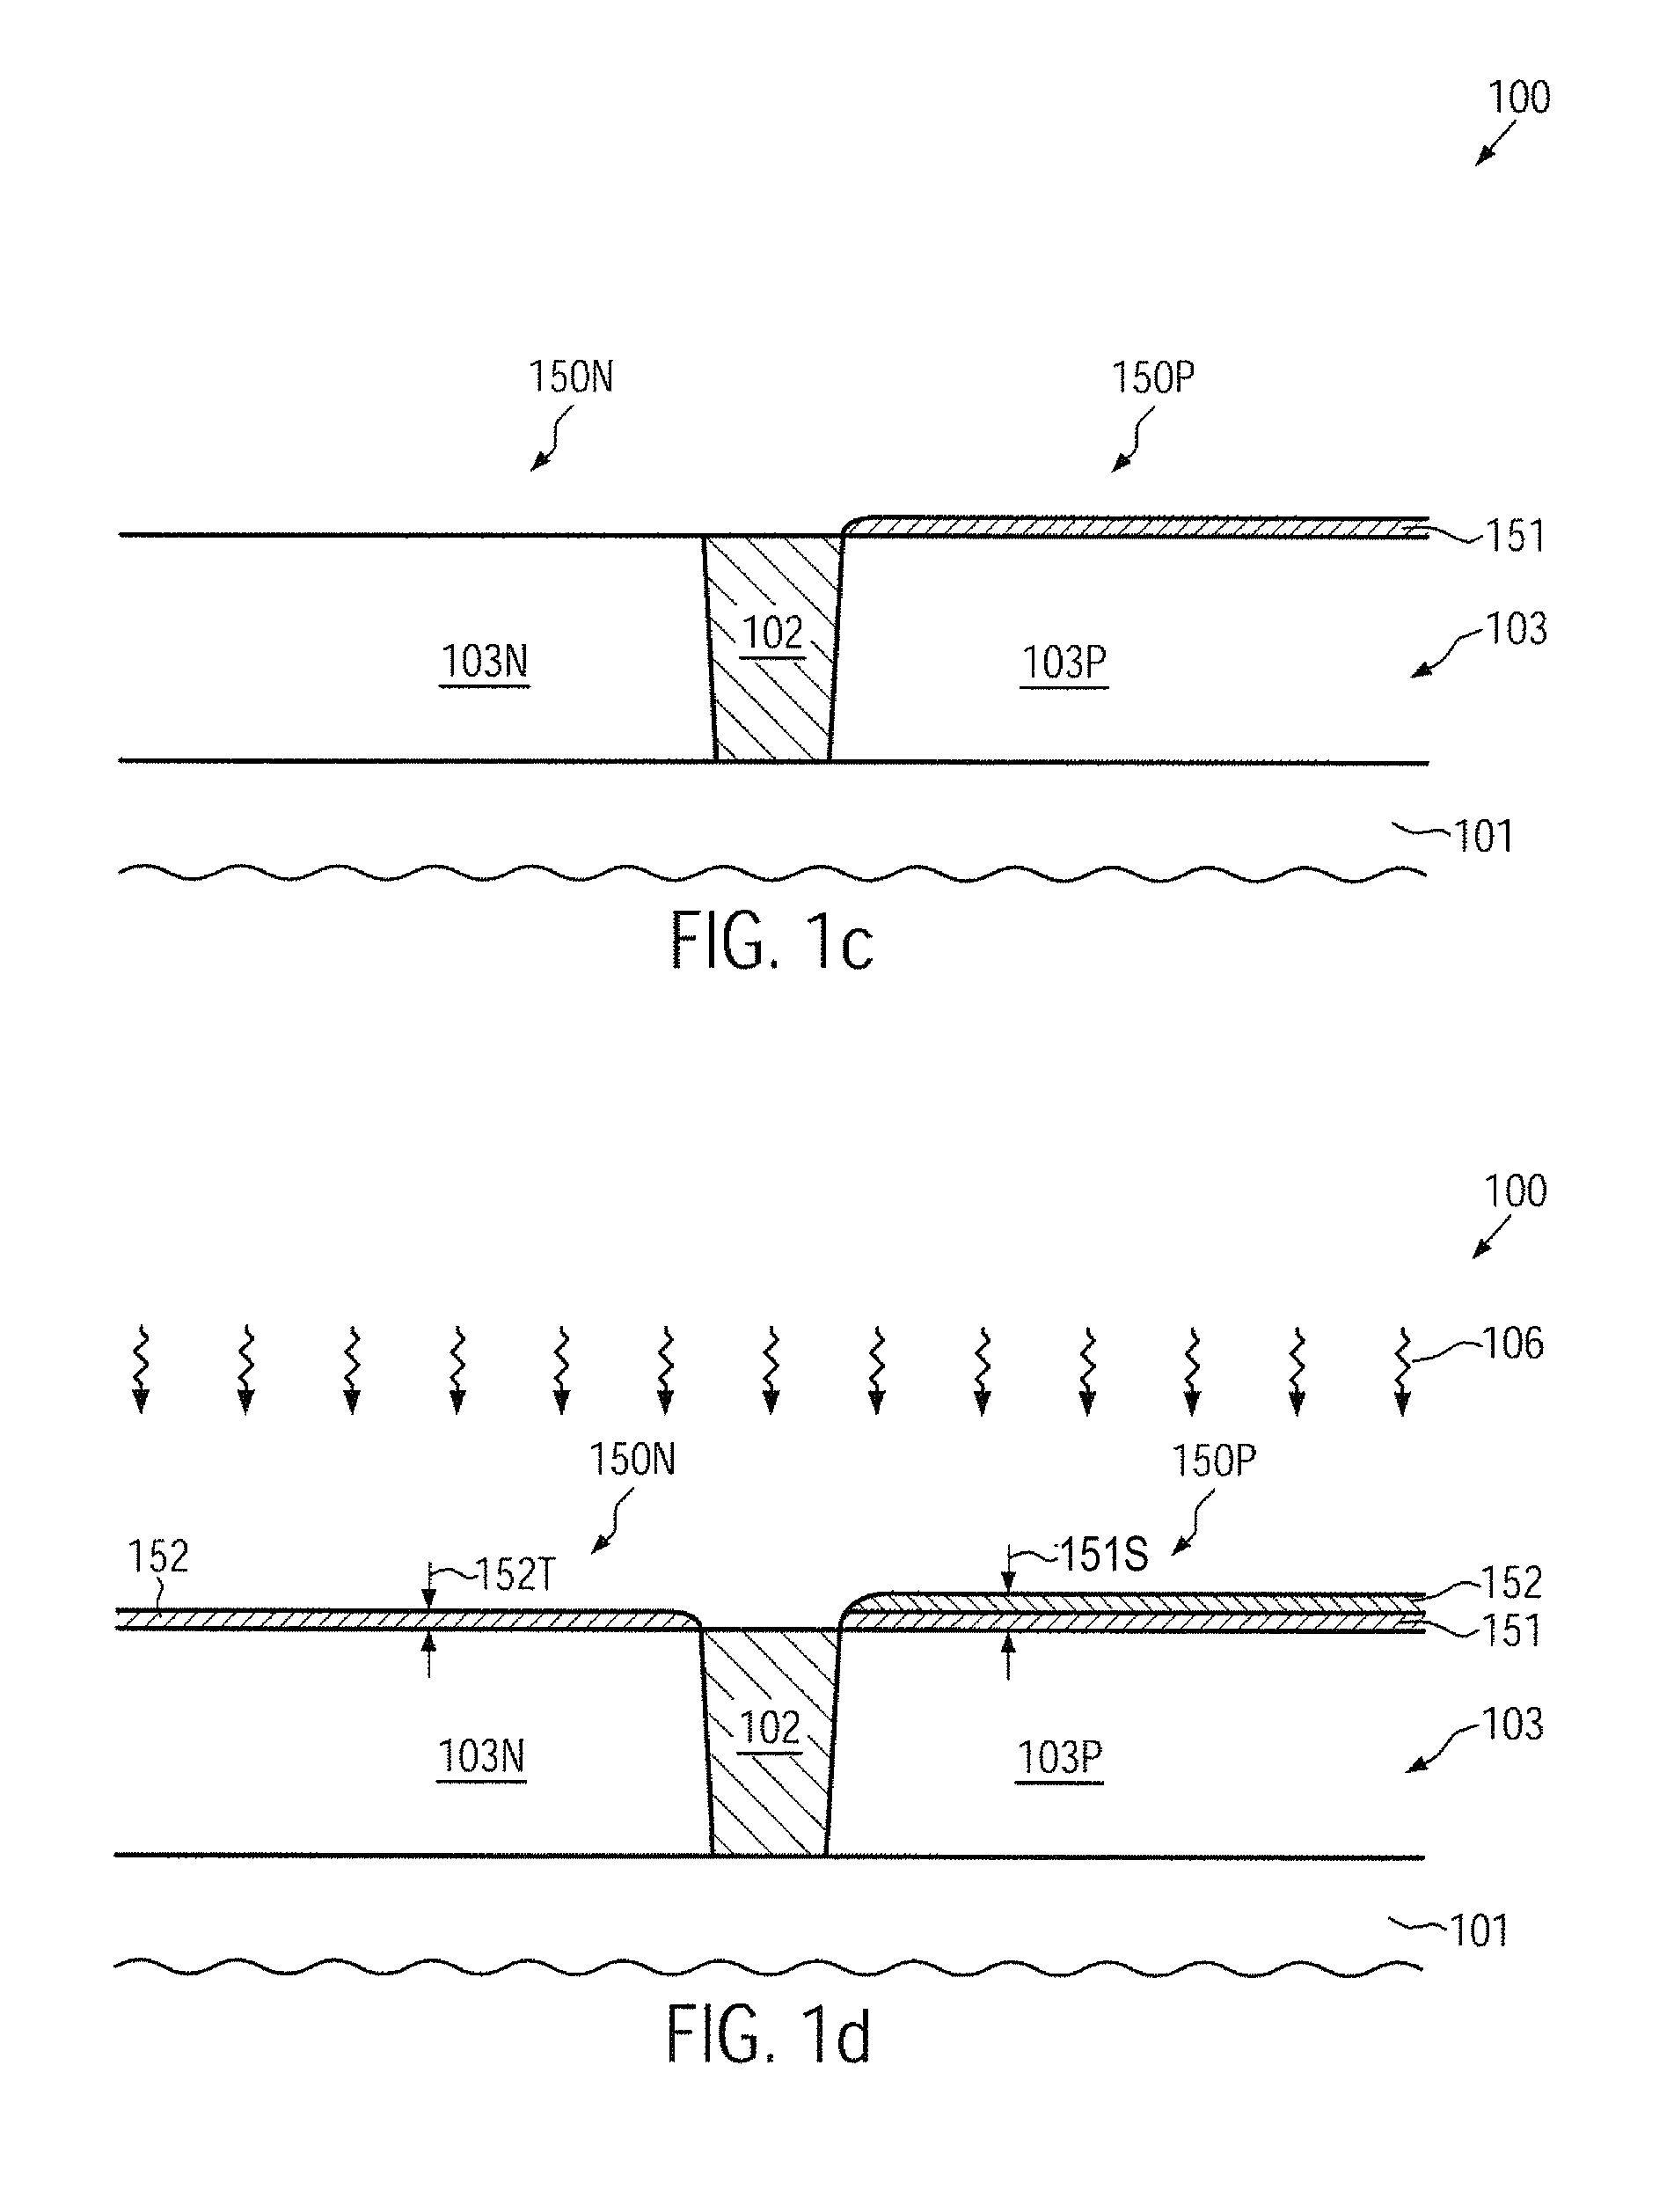 Gate dielectrics of different thickness in PMOS and NMOS transistors